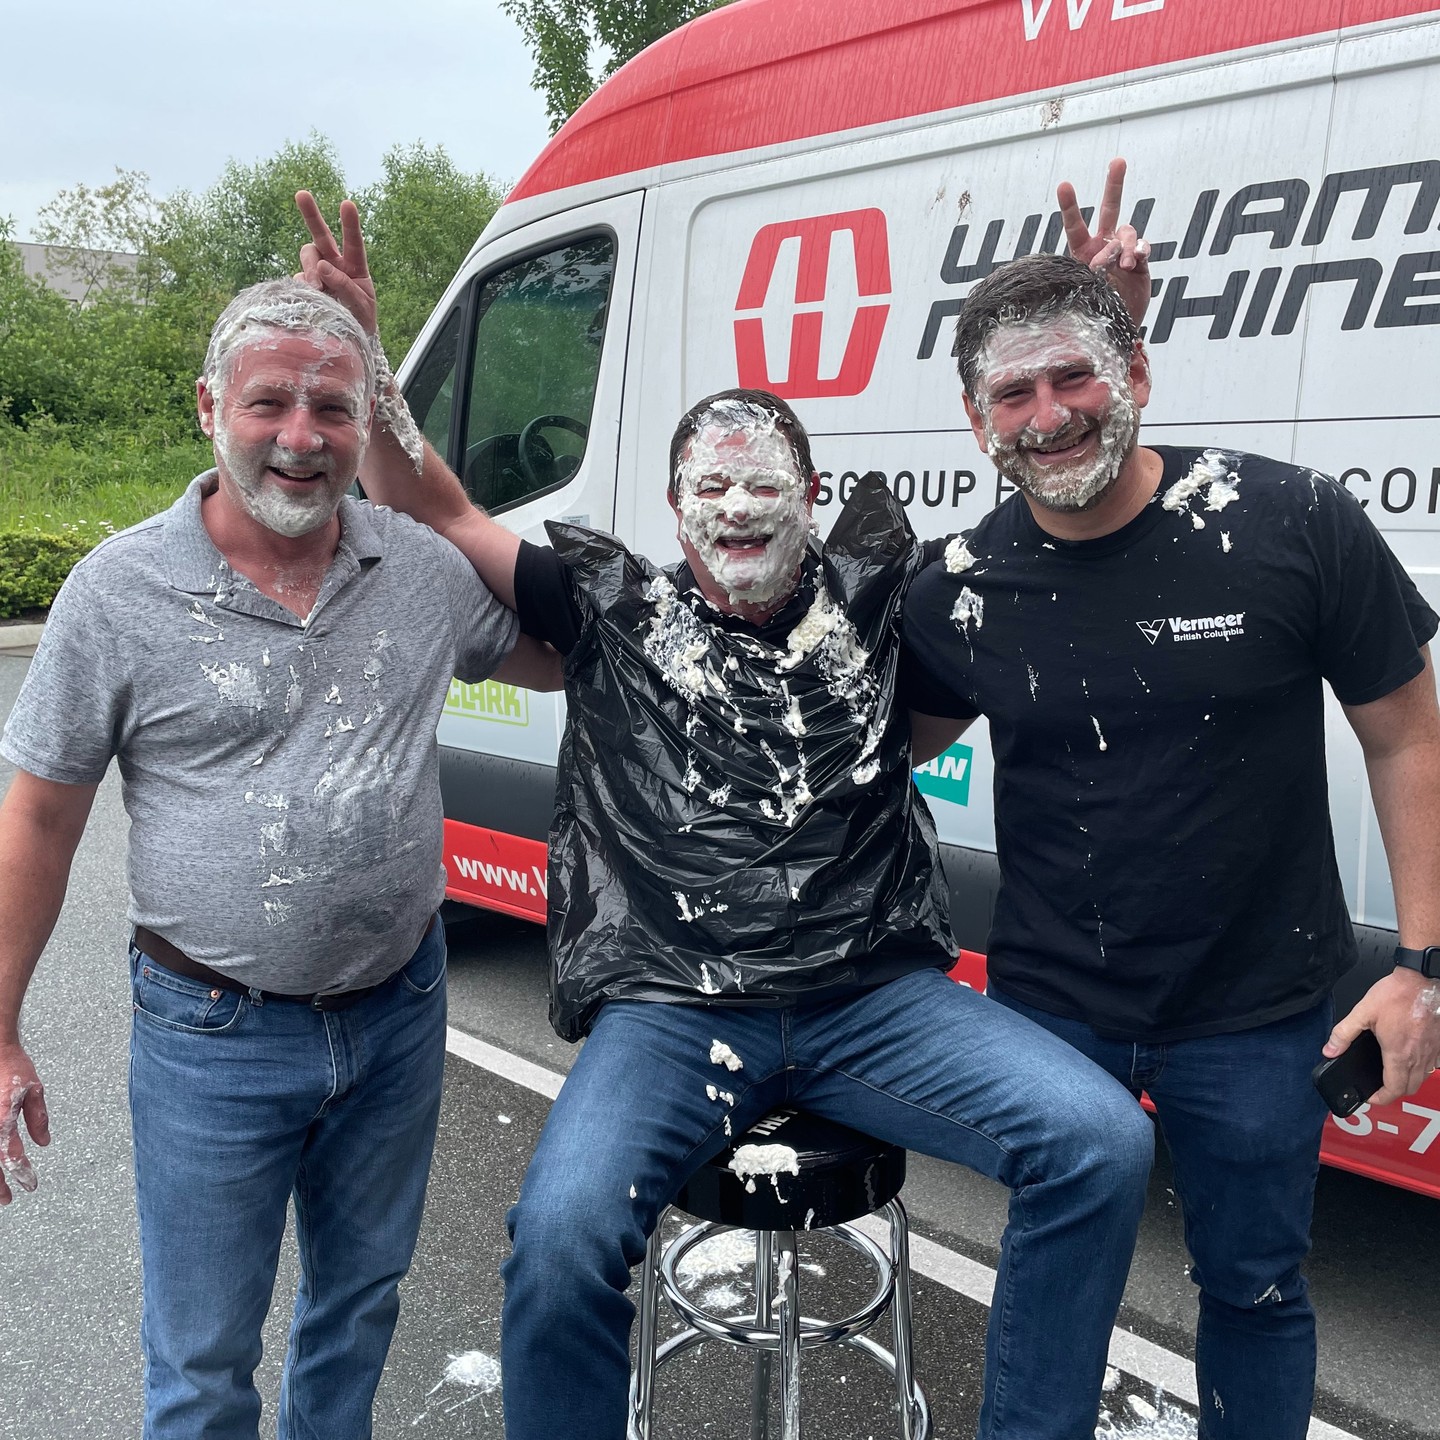 I guess nobody had a spoon around? Shout out to our managers across the company who took a pie to the face for a good cause this last week!

#pied #westerra #williams #team #teamwork #pieface